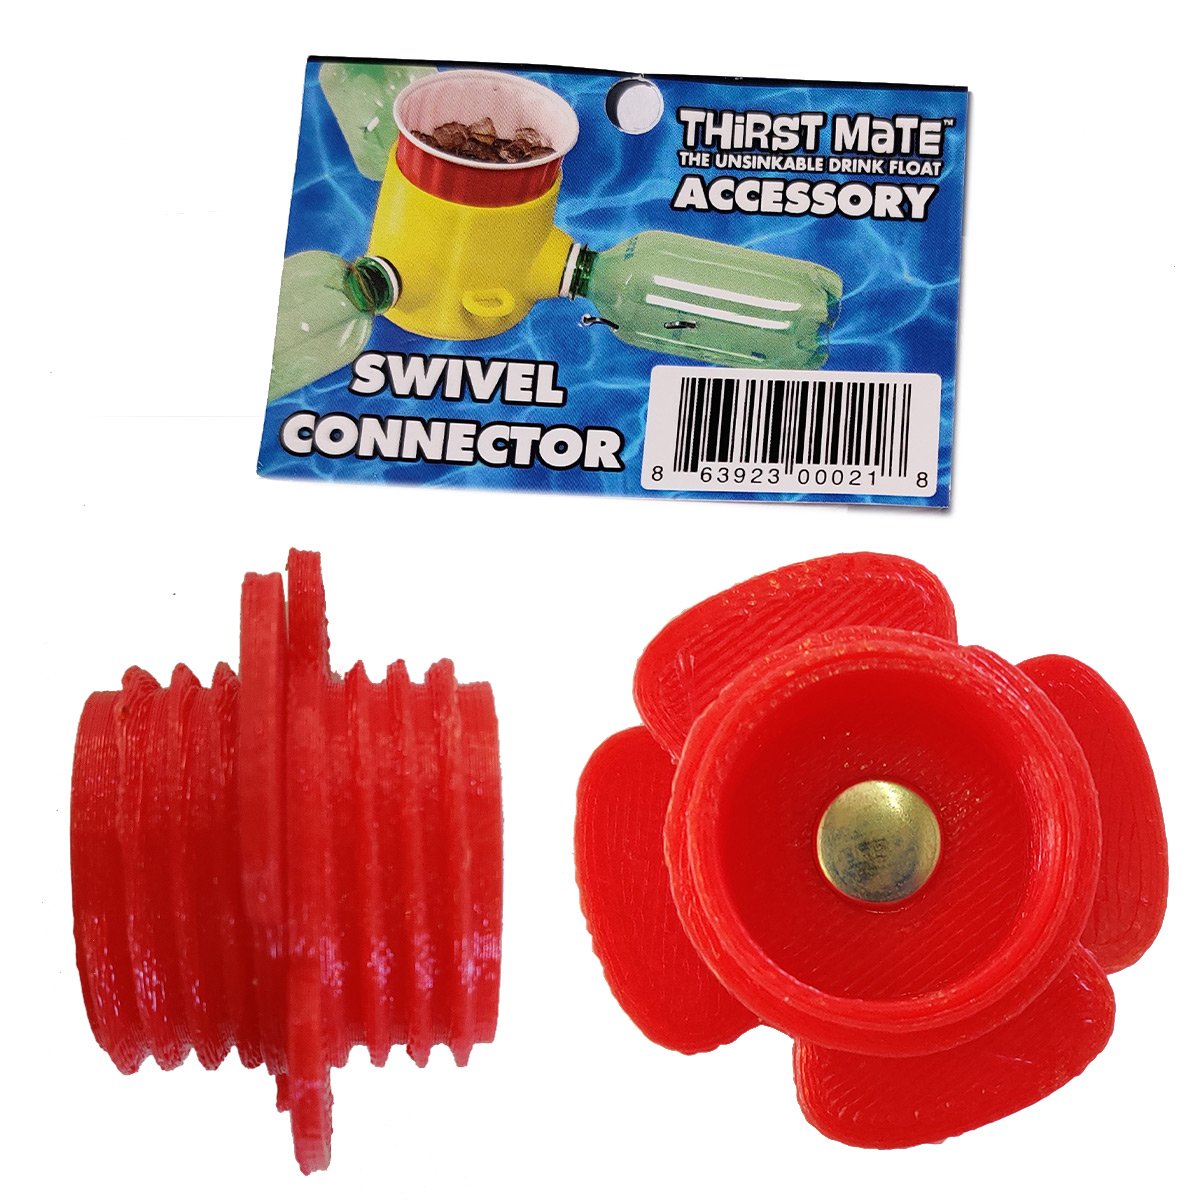 Swivel Connector for THIRST MATE™ - (Compostable)